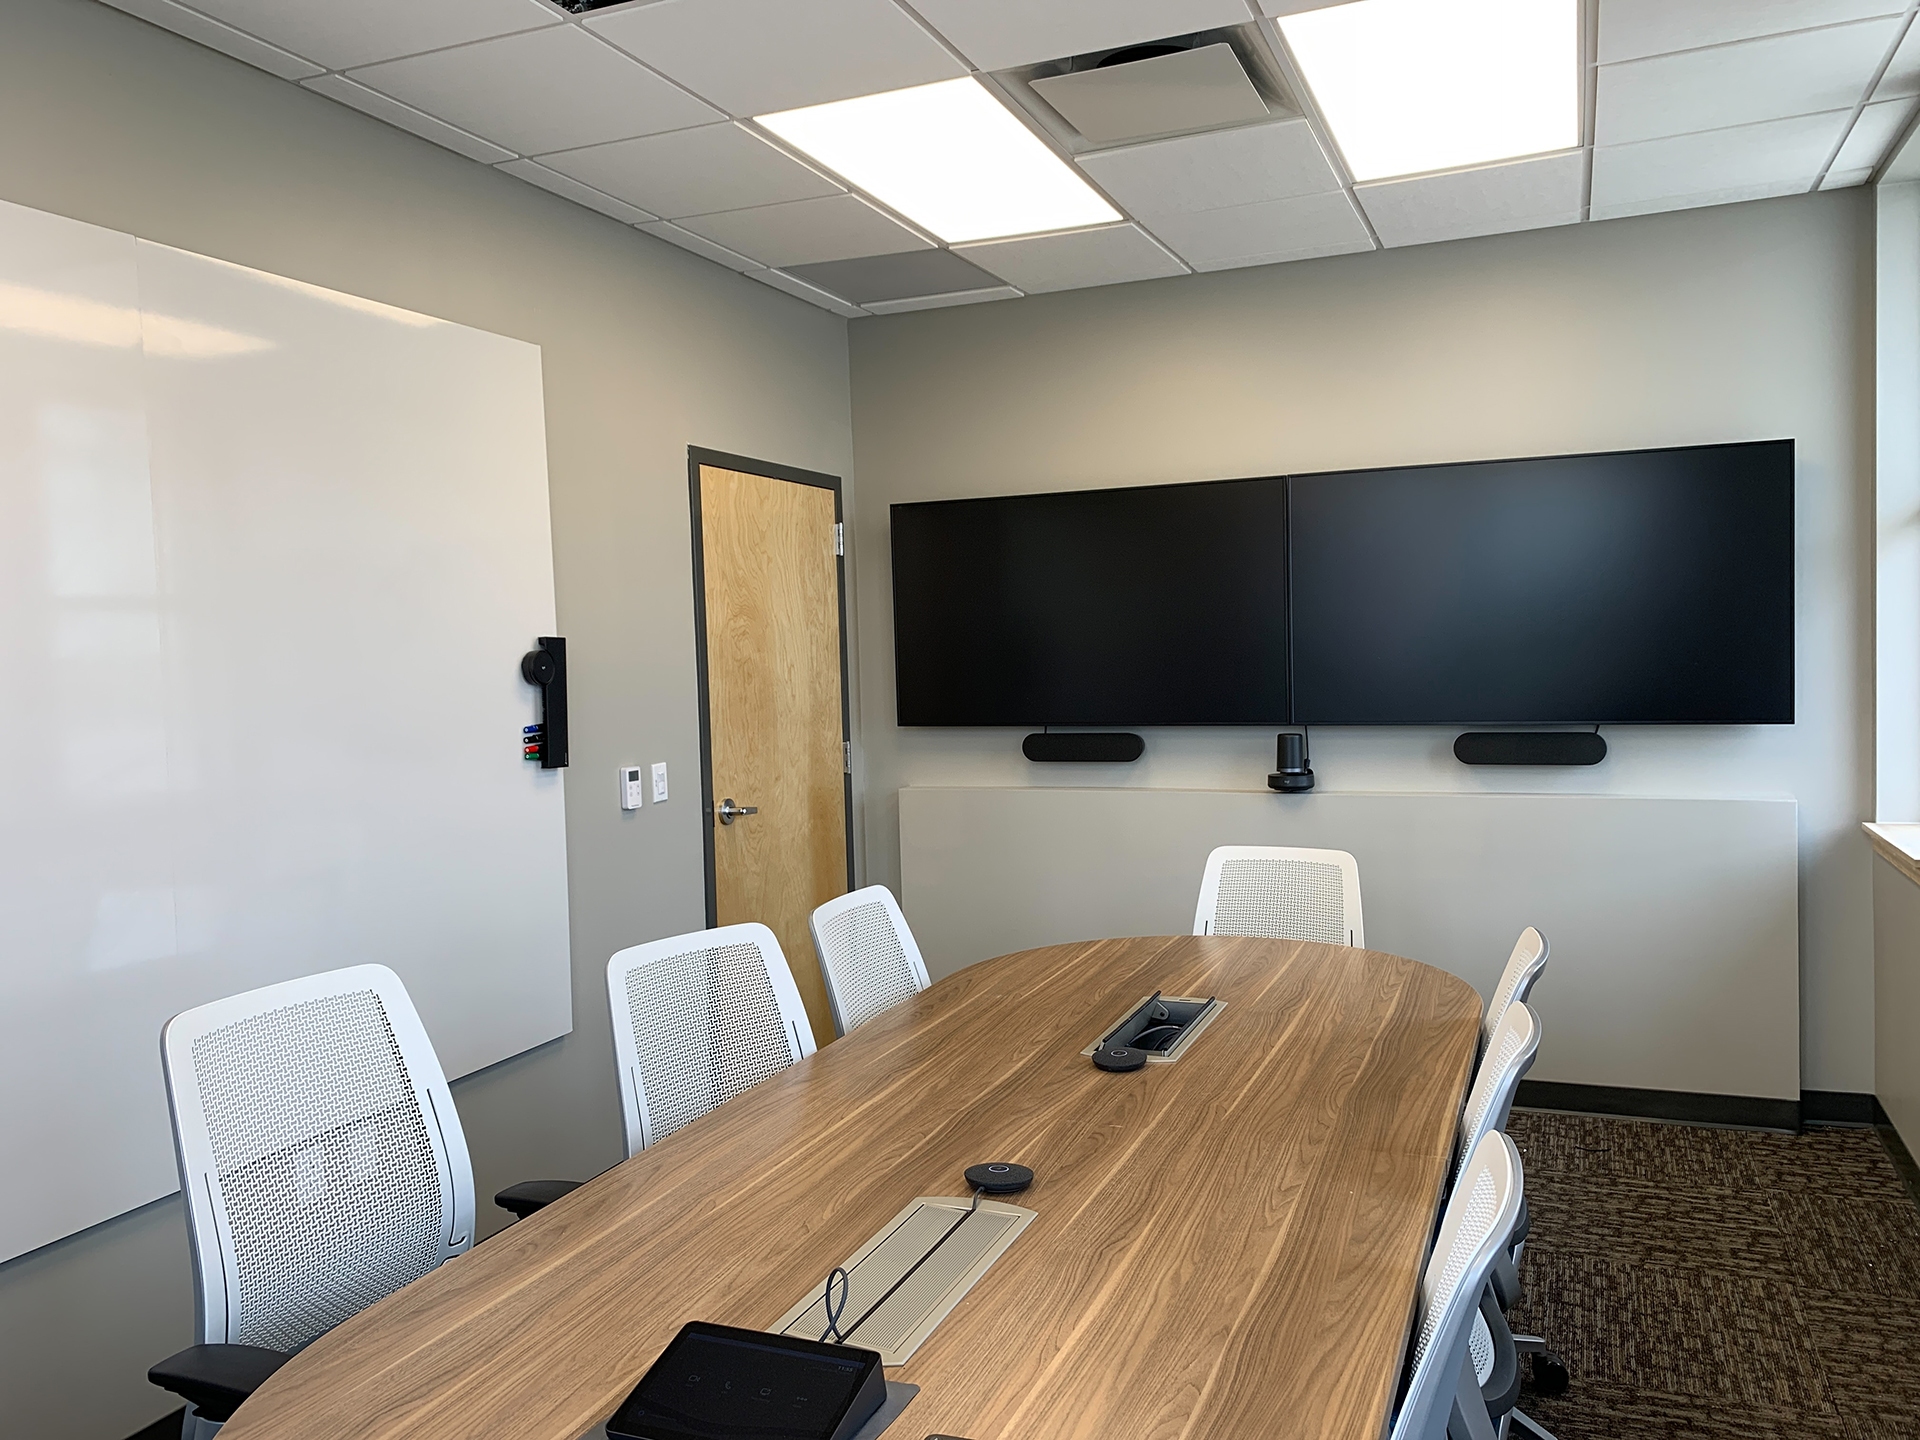 Turnaround Building Construction - small conference room by The McDonnel Group